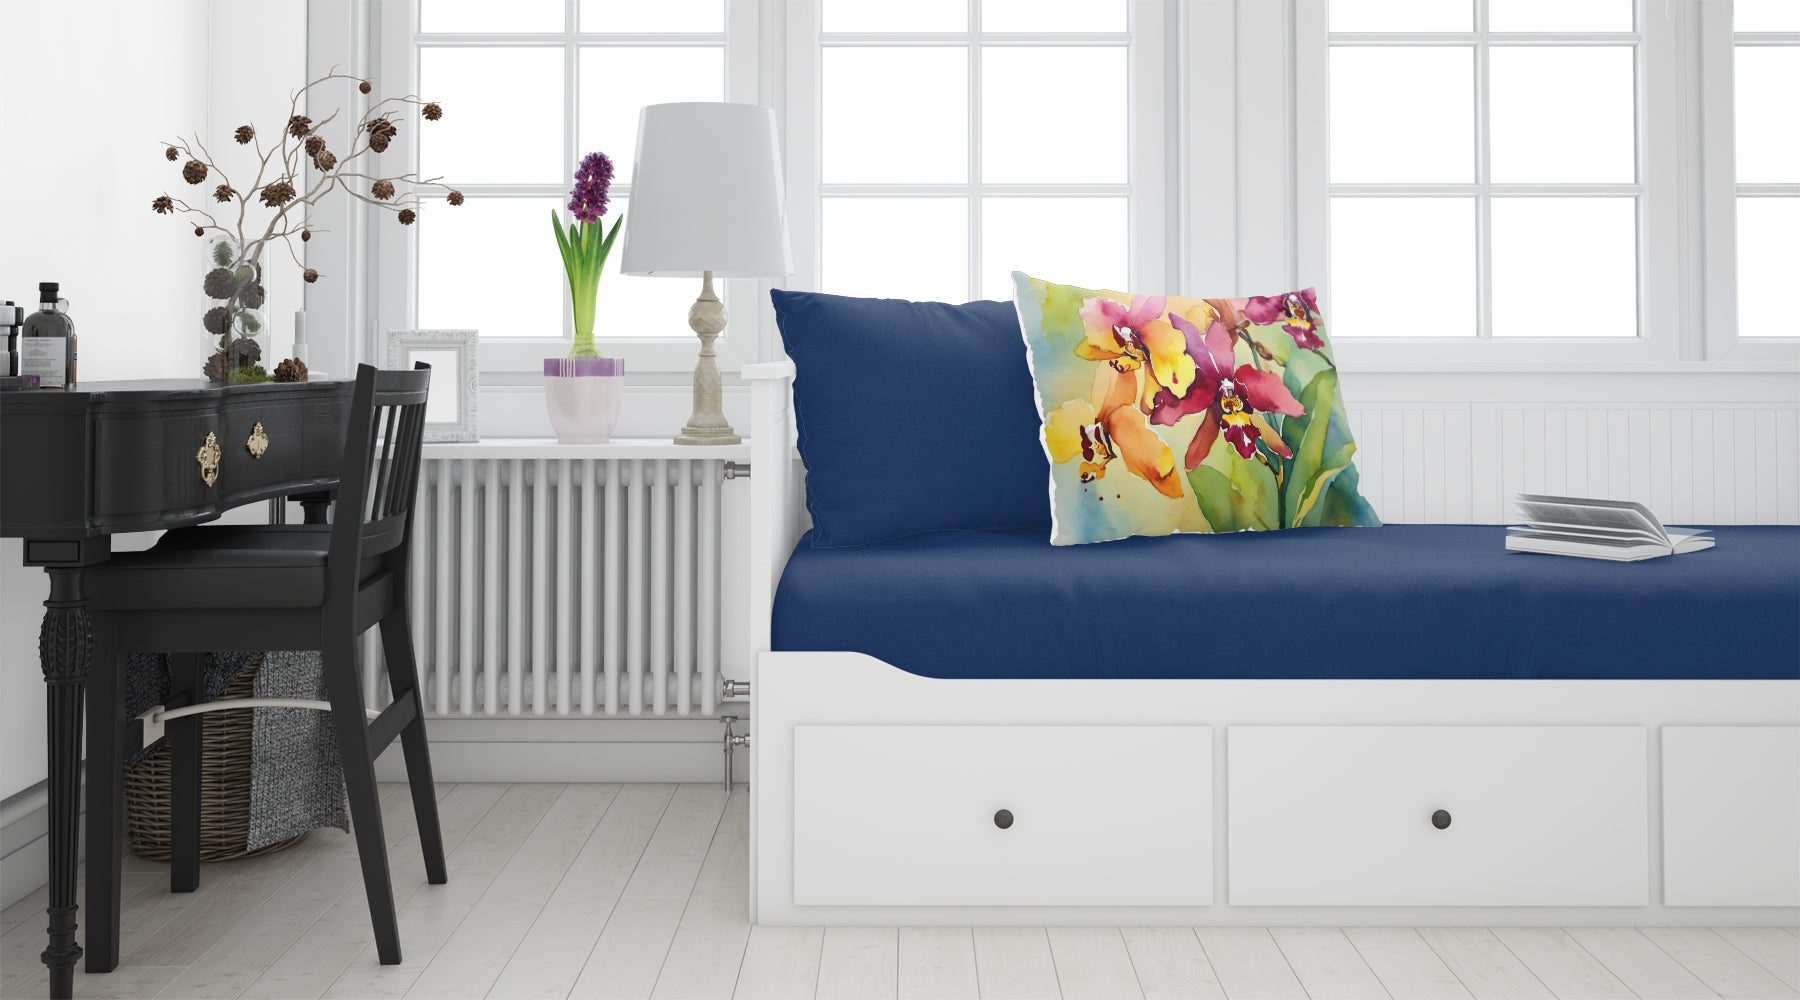 Buy this Orchids in Watercolor Fabric Standard Pillowcase